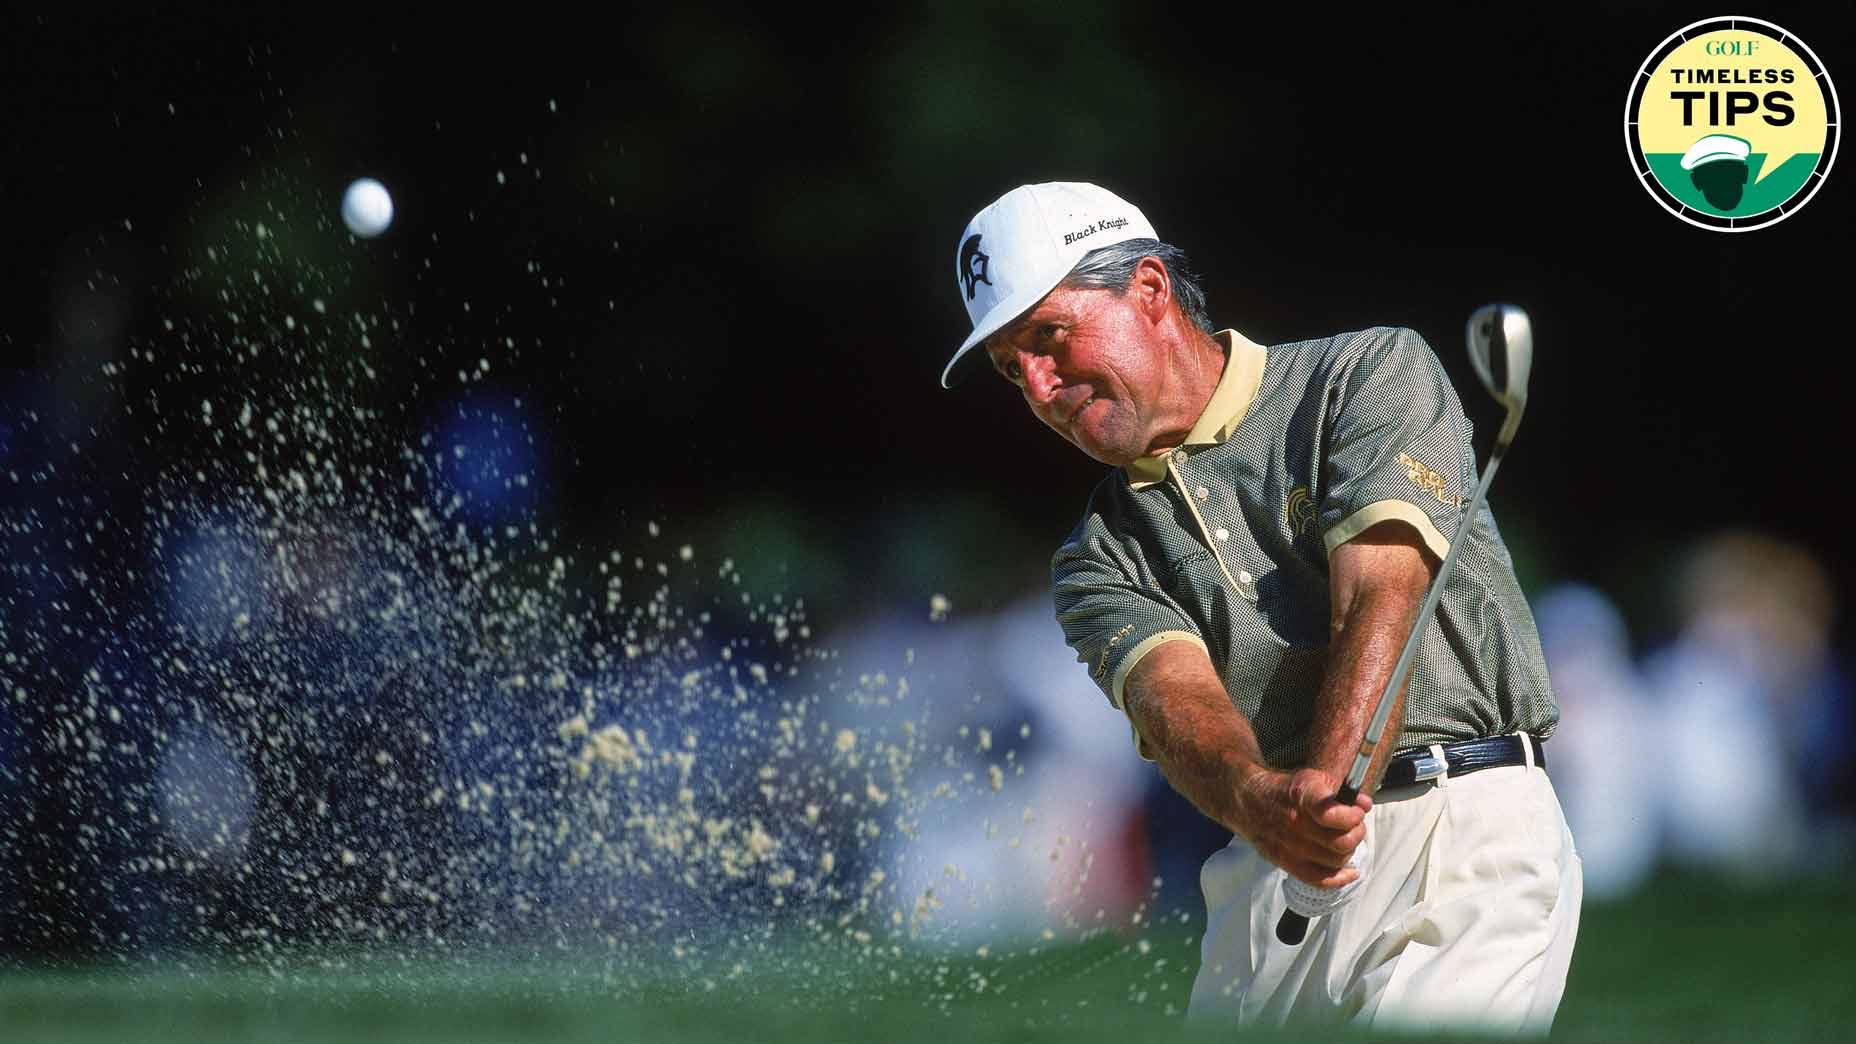 Pro golfer gary player hits a ball from a bunker